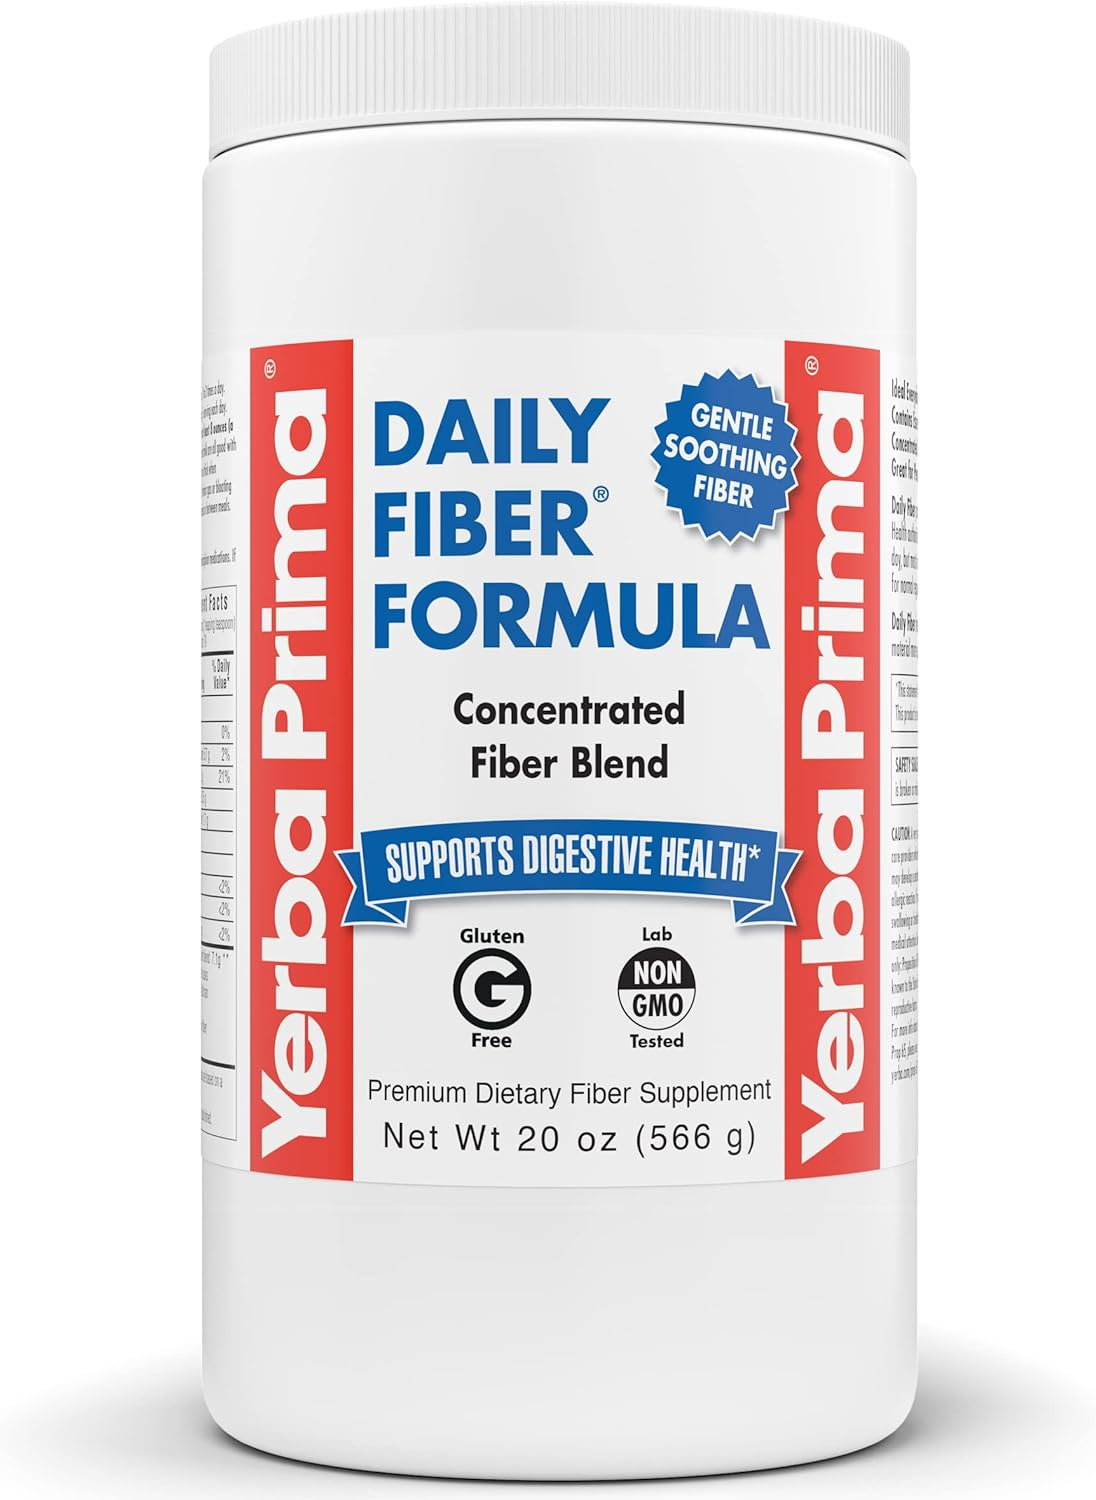 Yerba Prima Daily Fiber Formula - 20 oz Powder - Unflavored, Concentrated Blend of Soluble/Insoluble, Psyllium Seed Husks, Acacia Gum, Apple Fiber for Bulk - Dietary Bulking Supplement - Regularity